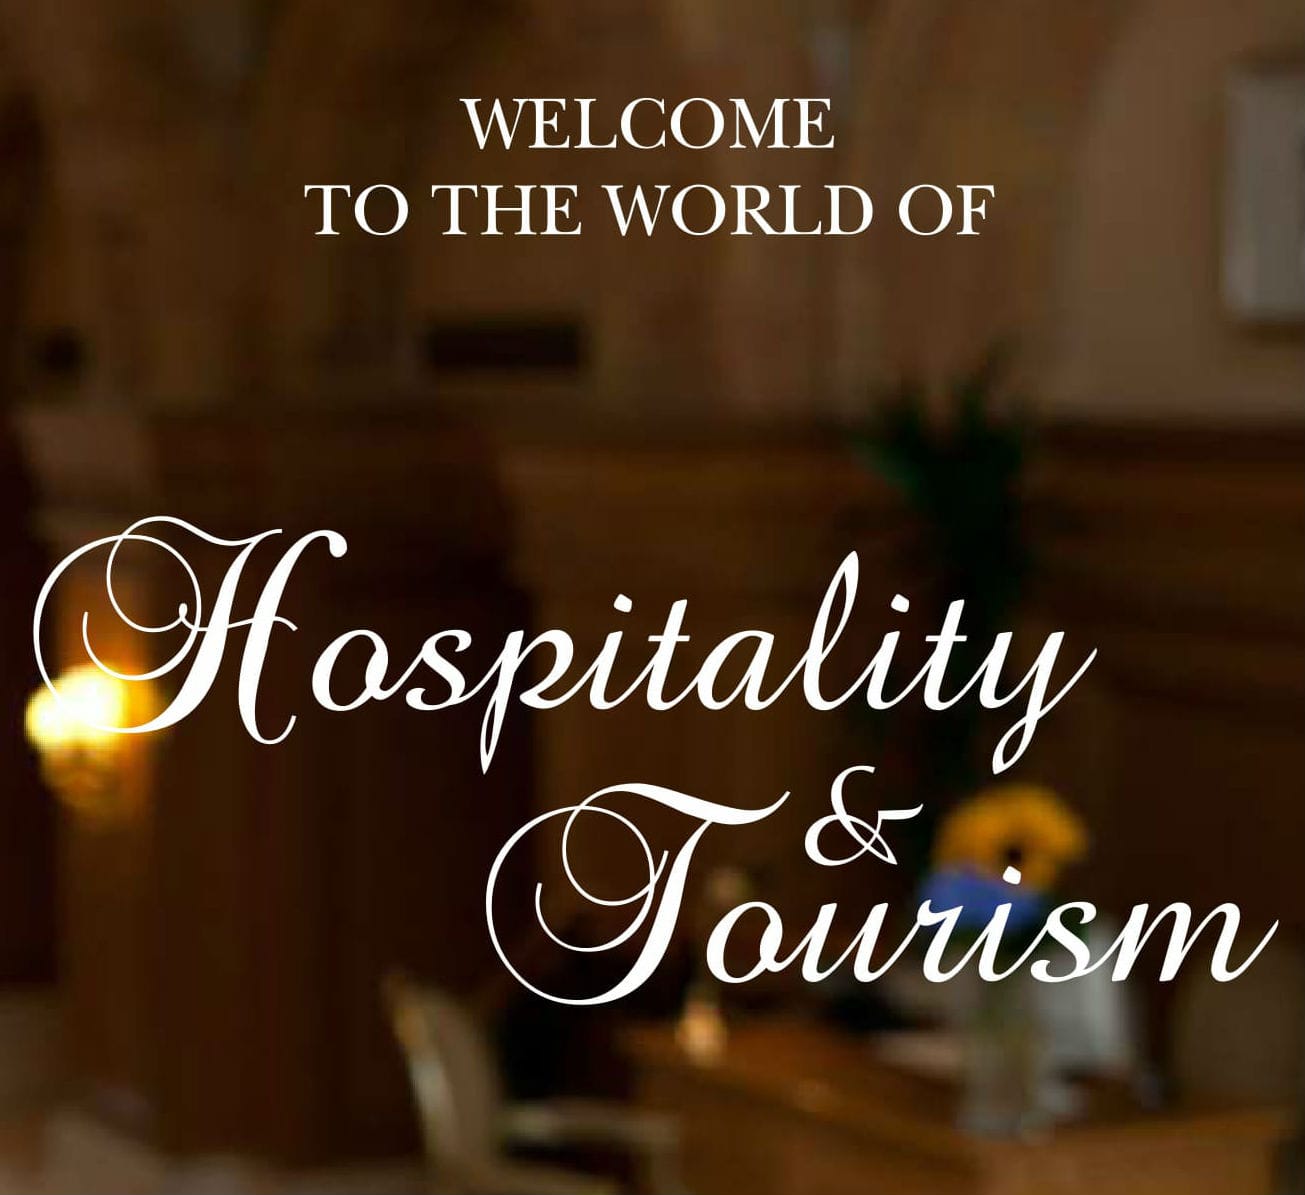 is it tourism or hospitality